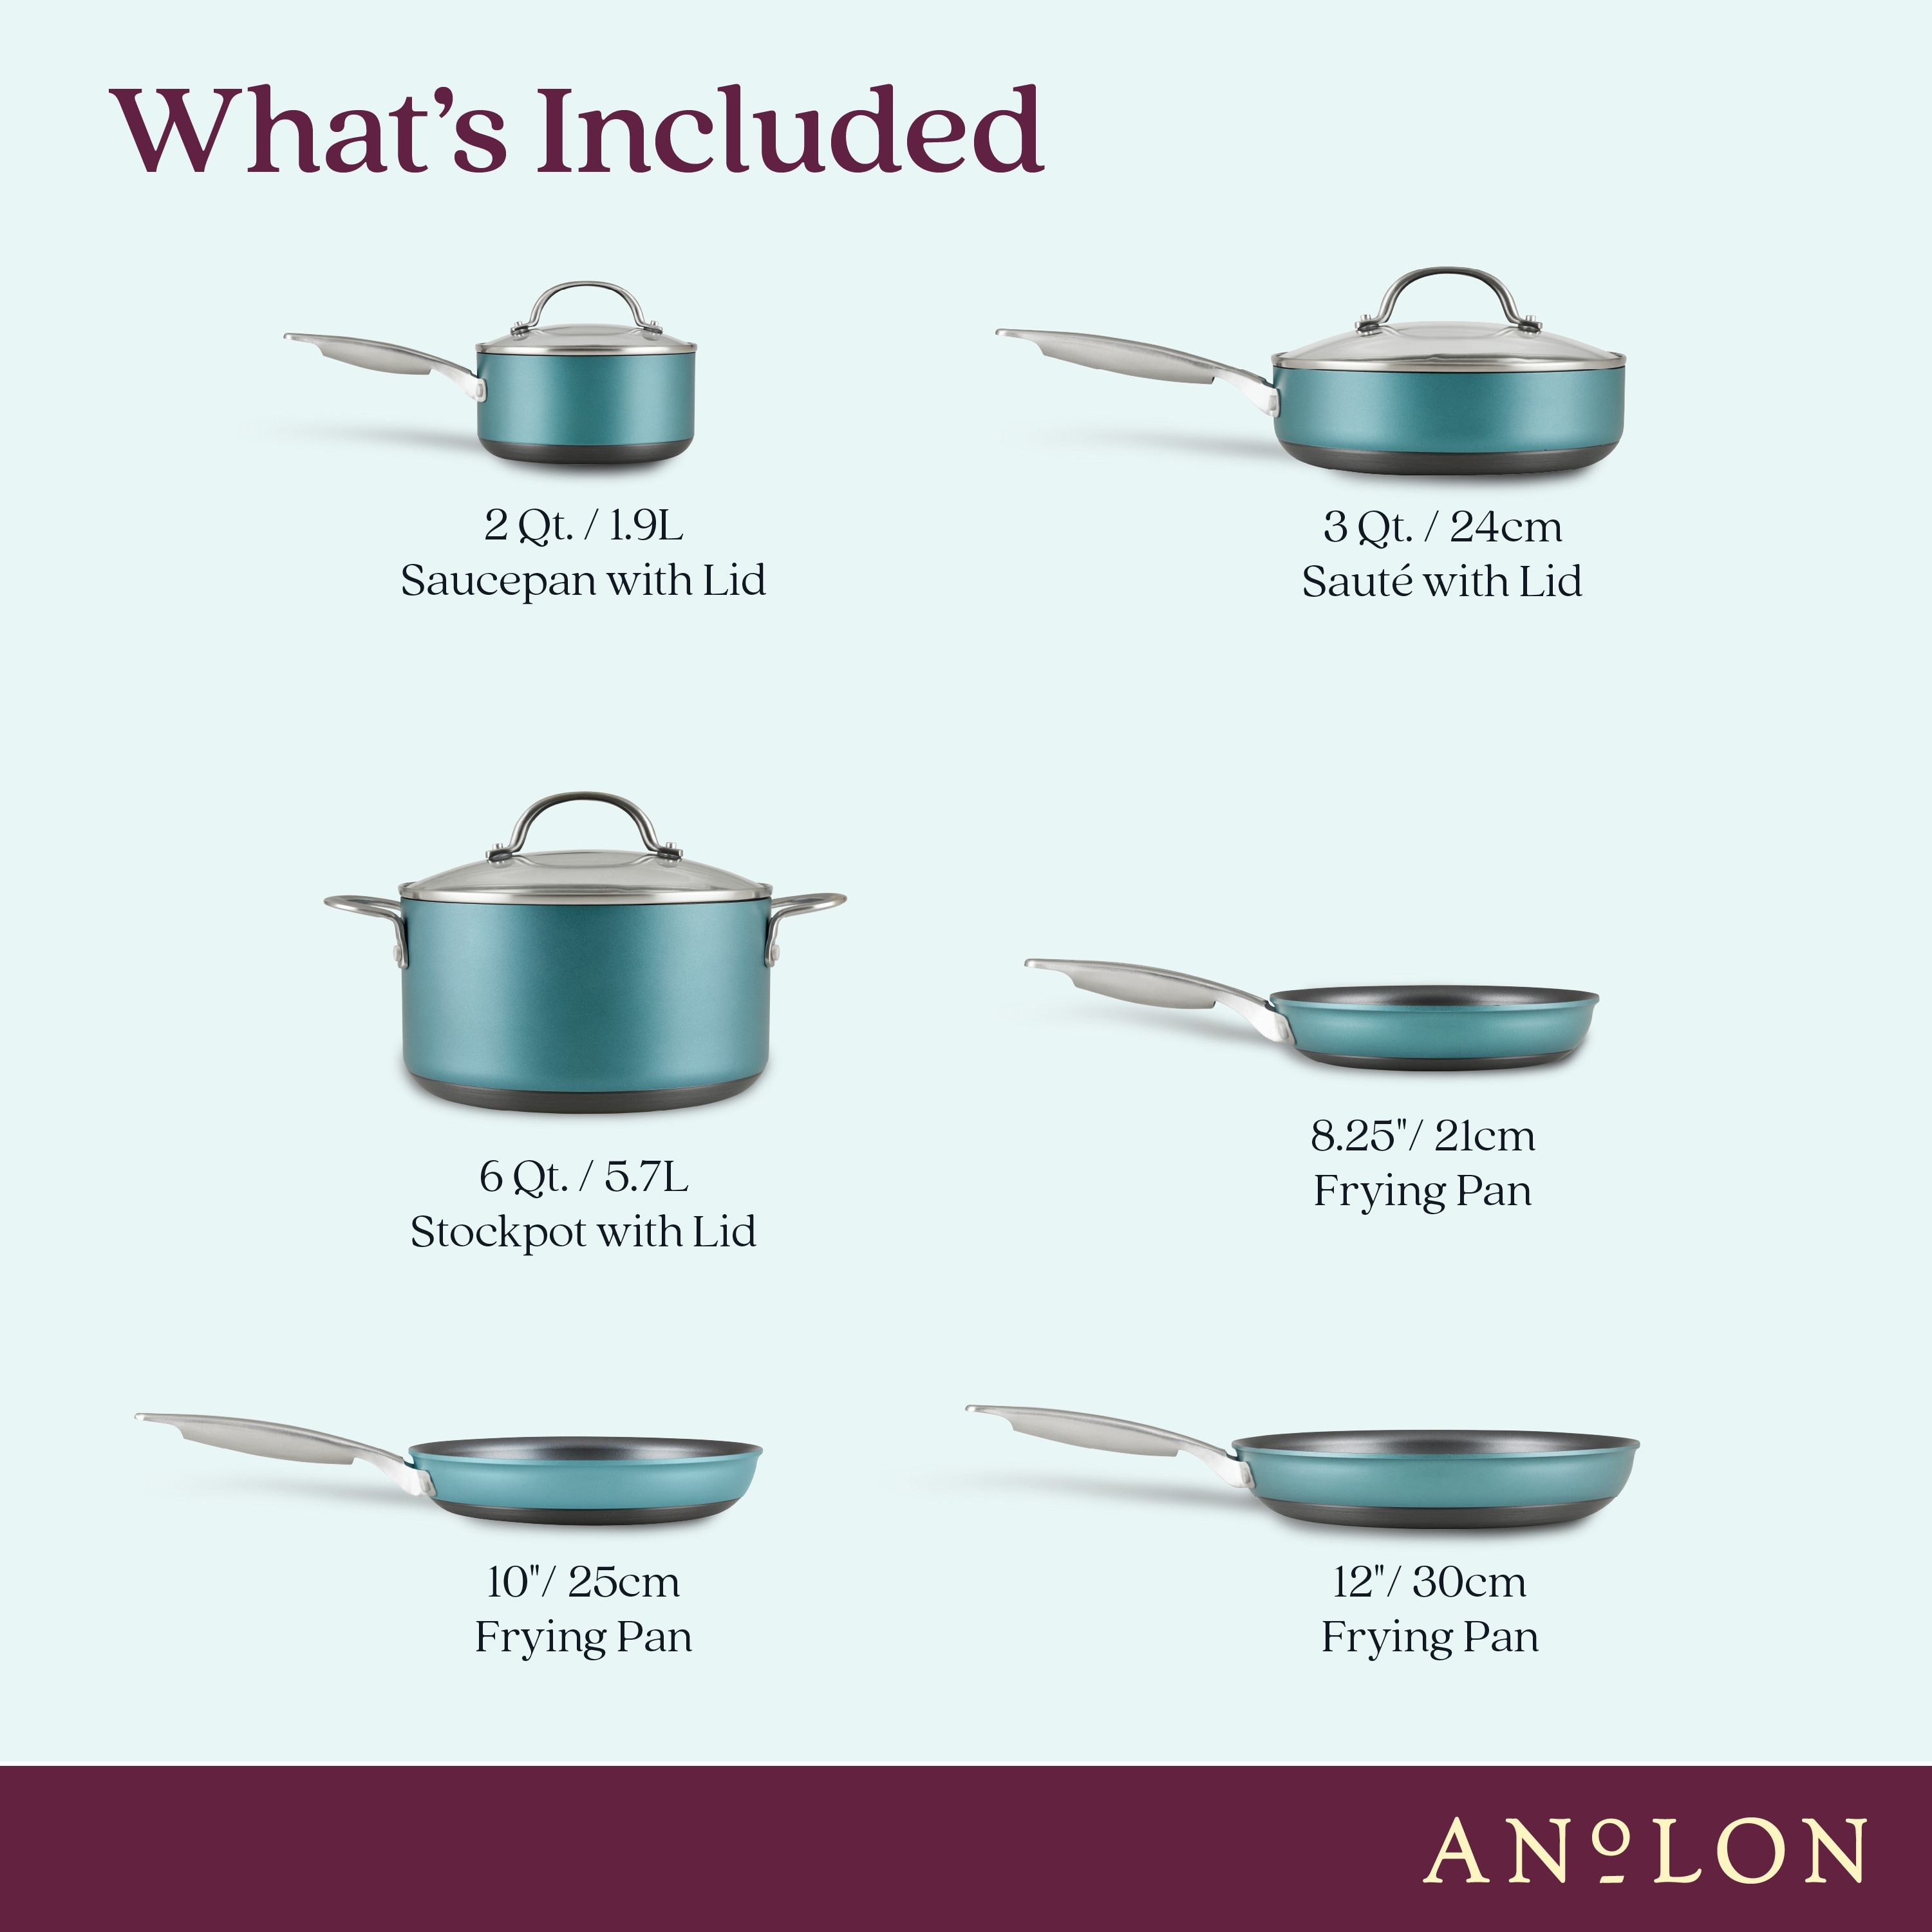 https://ak1.ostkcdn.com/images/products/is/images/direct/89436154b3ff778a8ad899074b40c8193f696e50/Anolon-Achieve-Hard-Anodized-Nonstick-Cookware-Pots-and-Pans-Set%2C-9-Piece.jpg